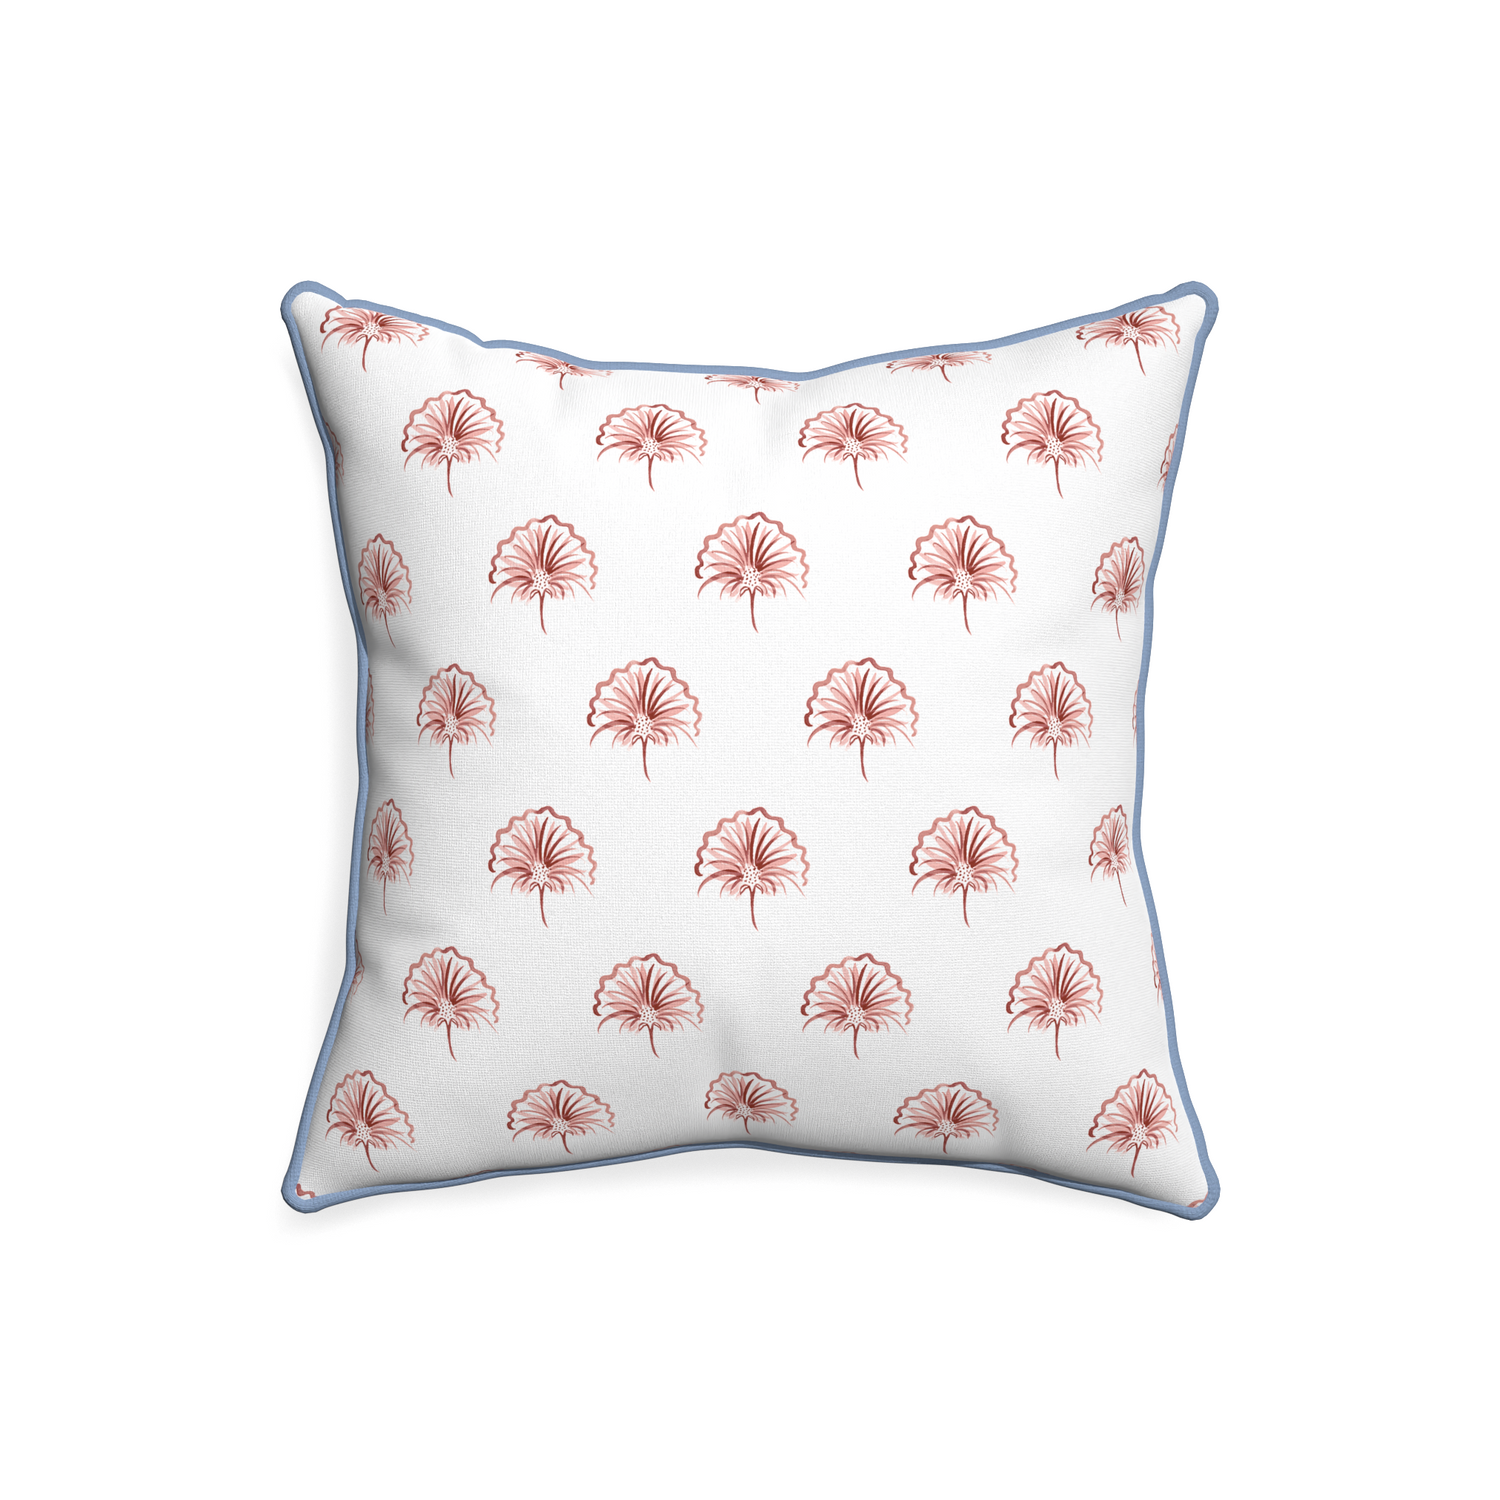 20-square penelope rose custom pillow with sky piping on white background